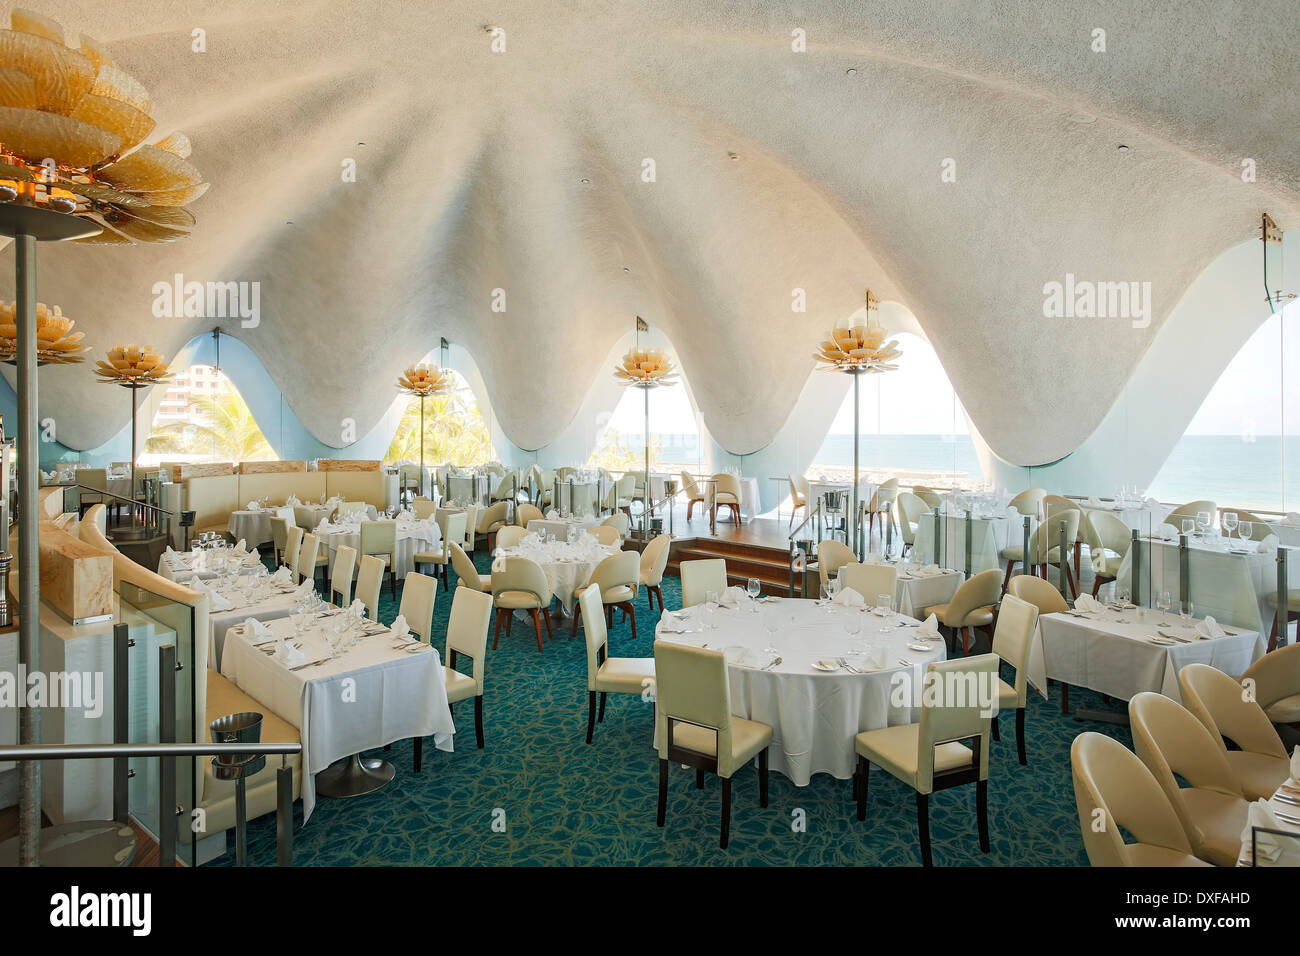 La Perla Restaurant High Resolution Stock Photography and Images - Alamy